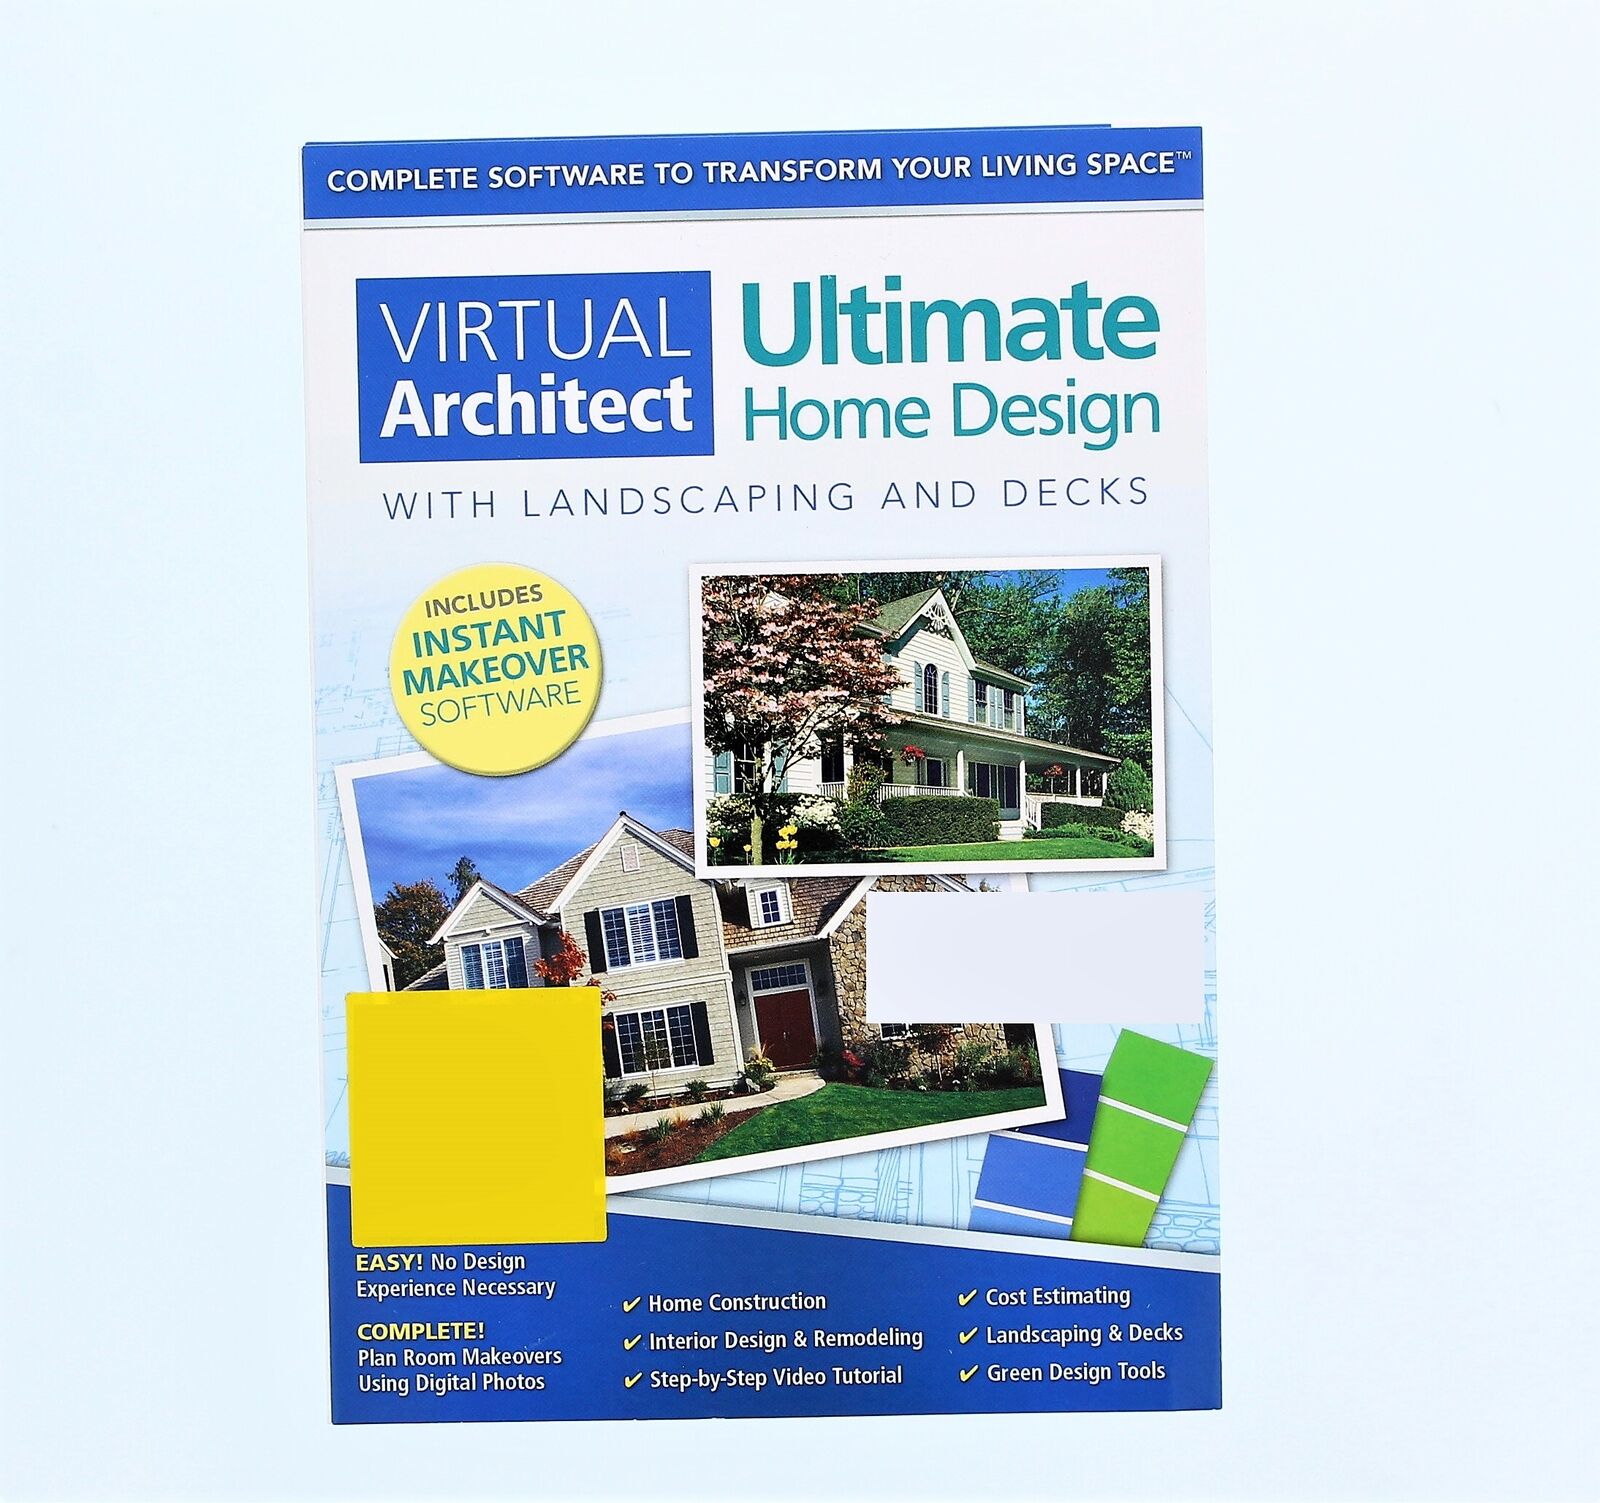 VIRTUAL ARCHITECT Ultimate Home Design With Landscaping and Decks Software